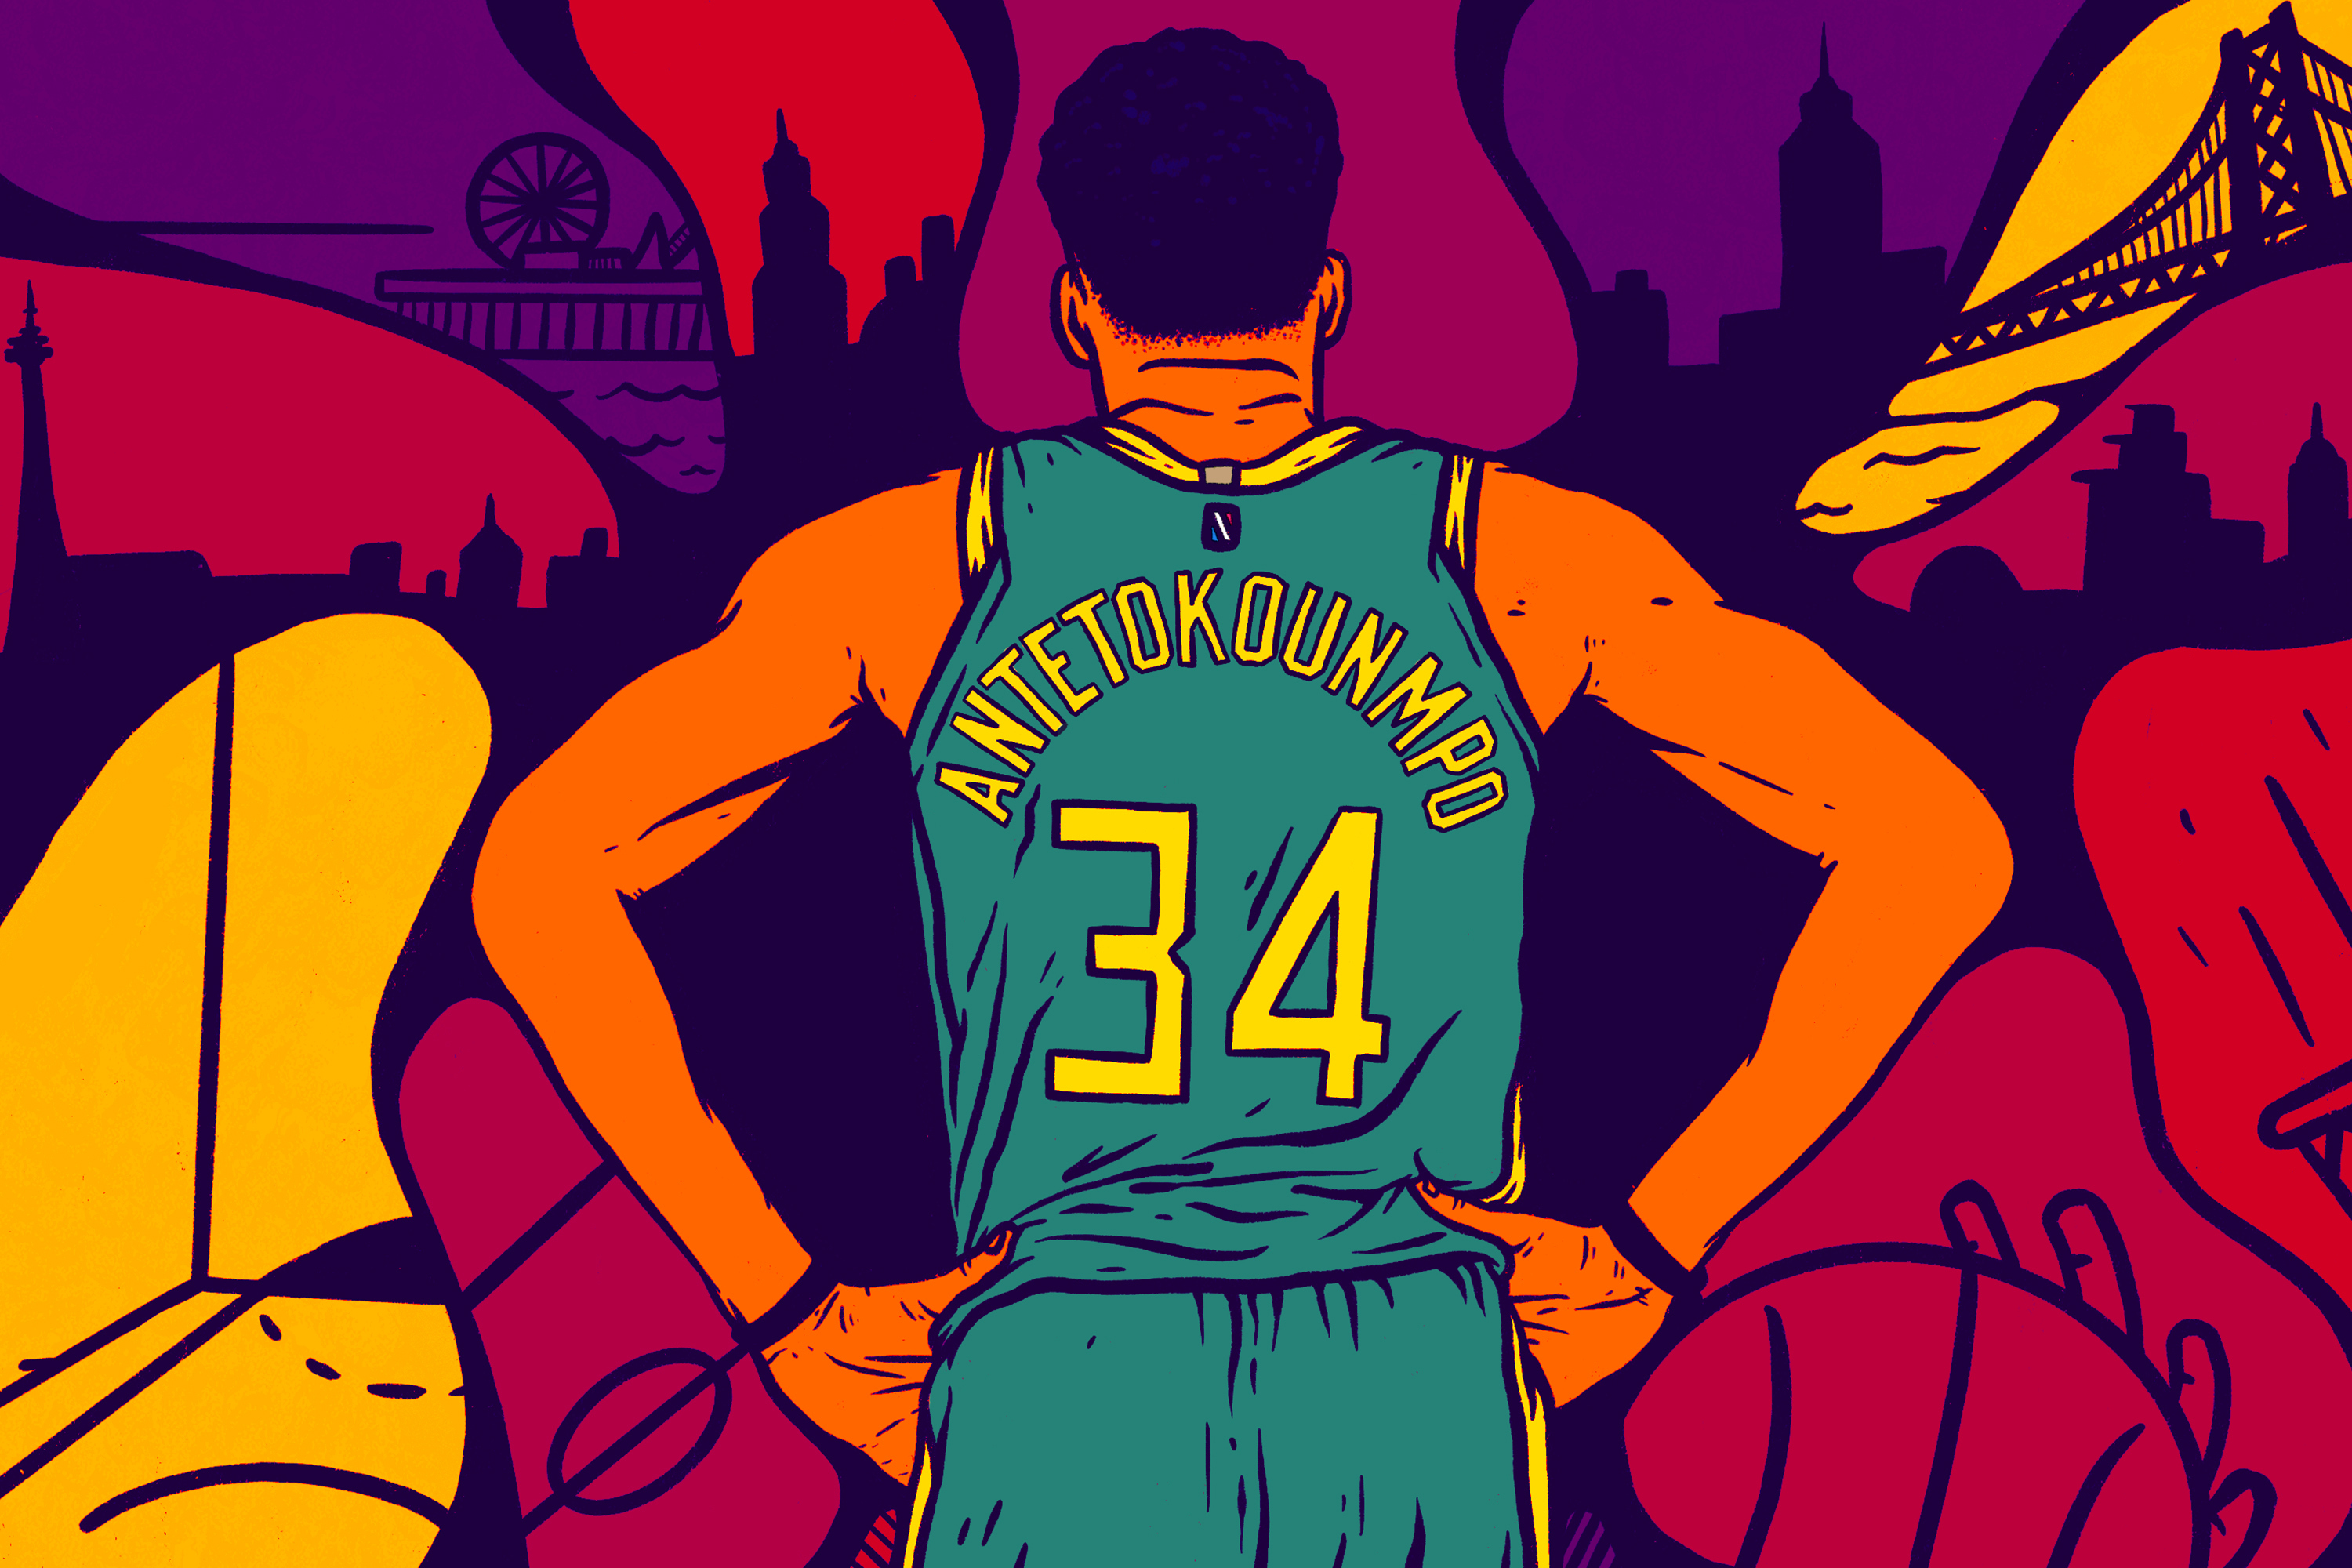 Is Giannis Built to Break the Mold?. Bleacher Report. Latest News, Videos and Highlights